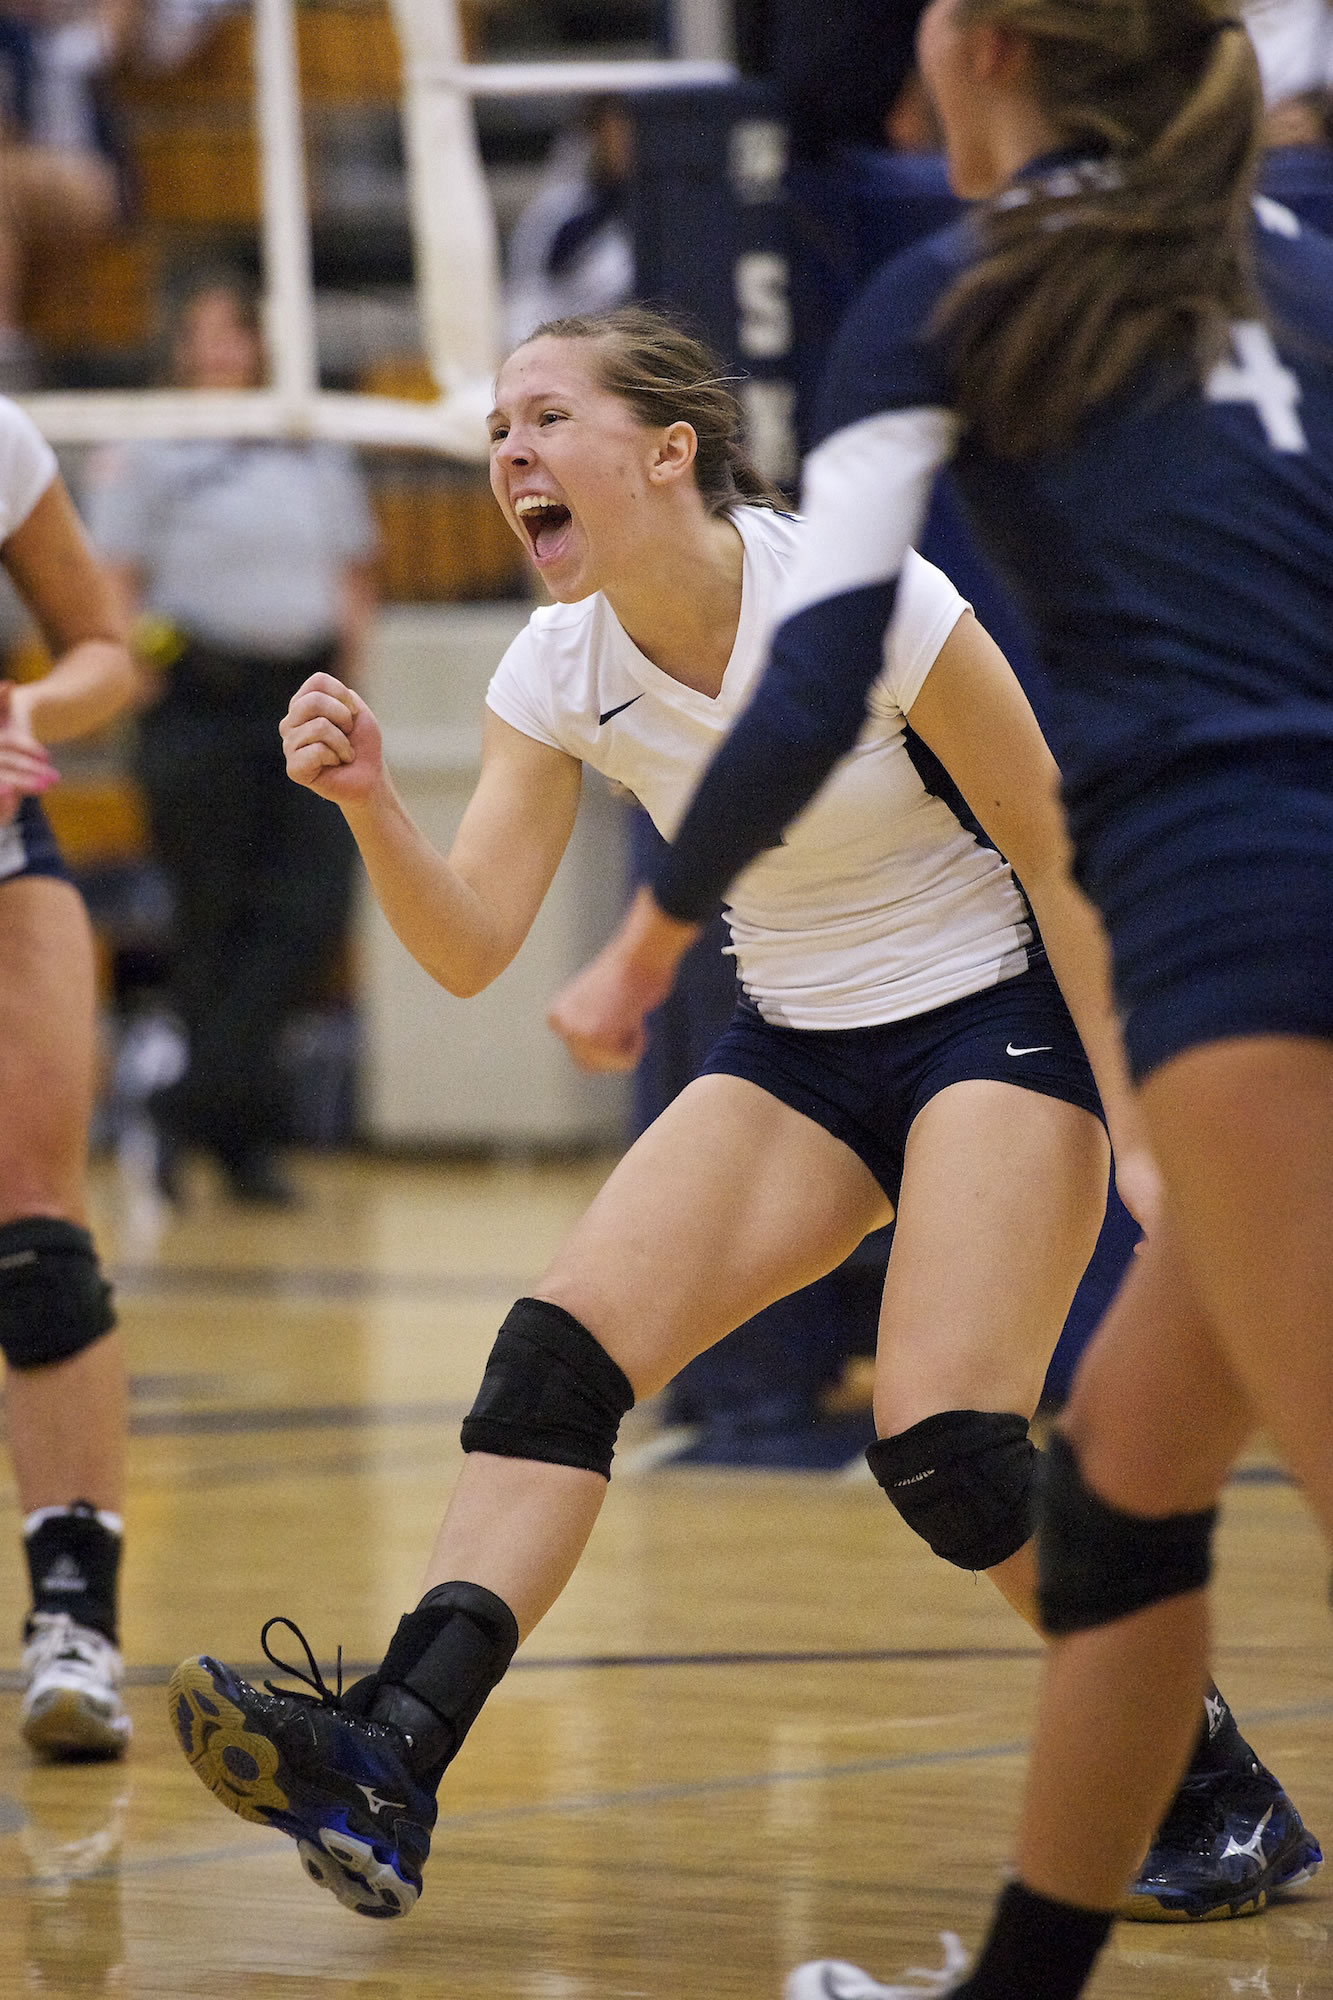 Shelby Swanson (1) of Skyview High School celebrates a point in Skyview's win over Camas in the opener of Class 4A Greater St. Helens League play.